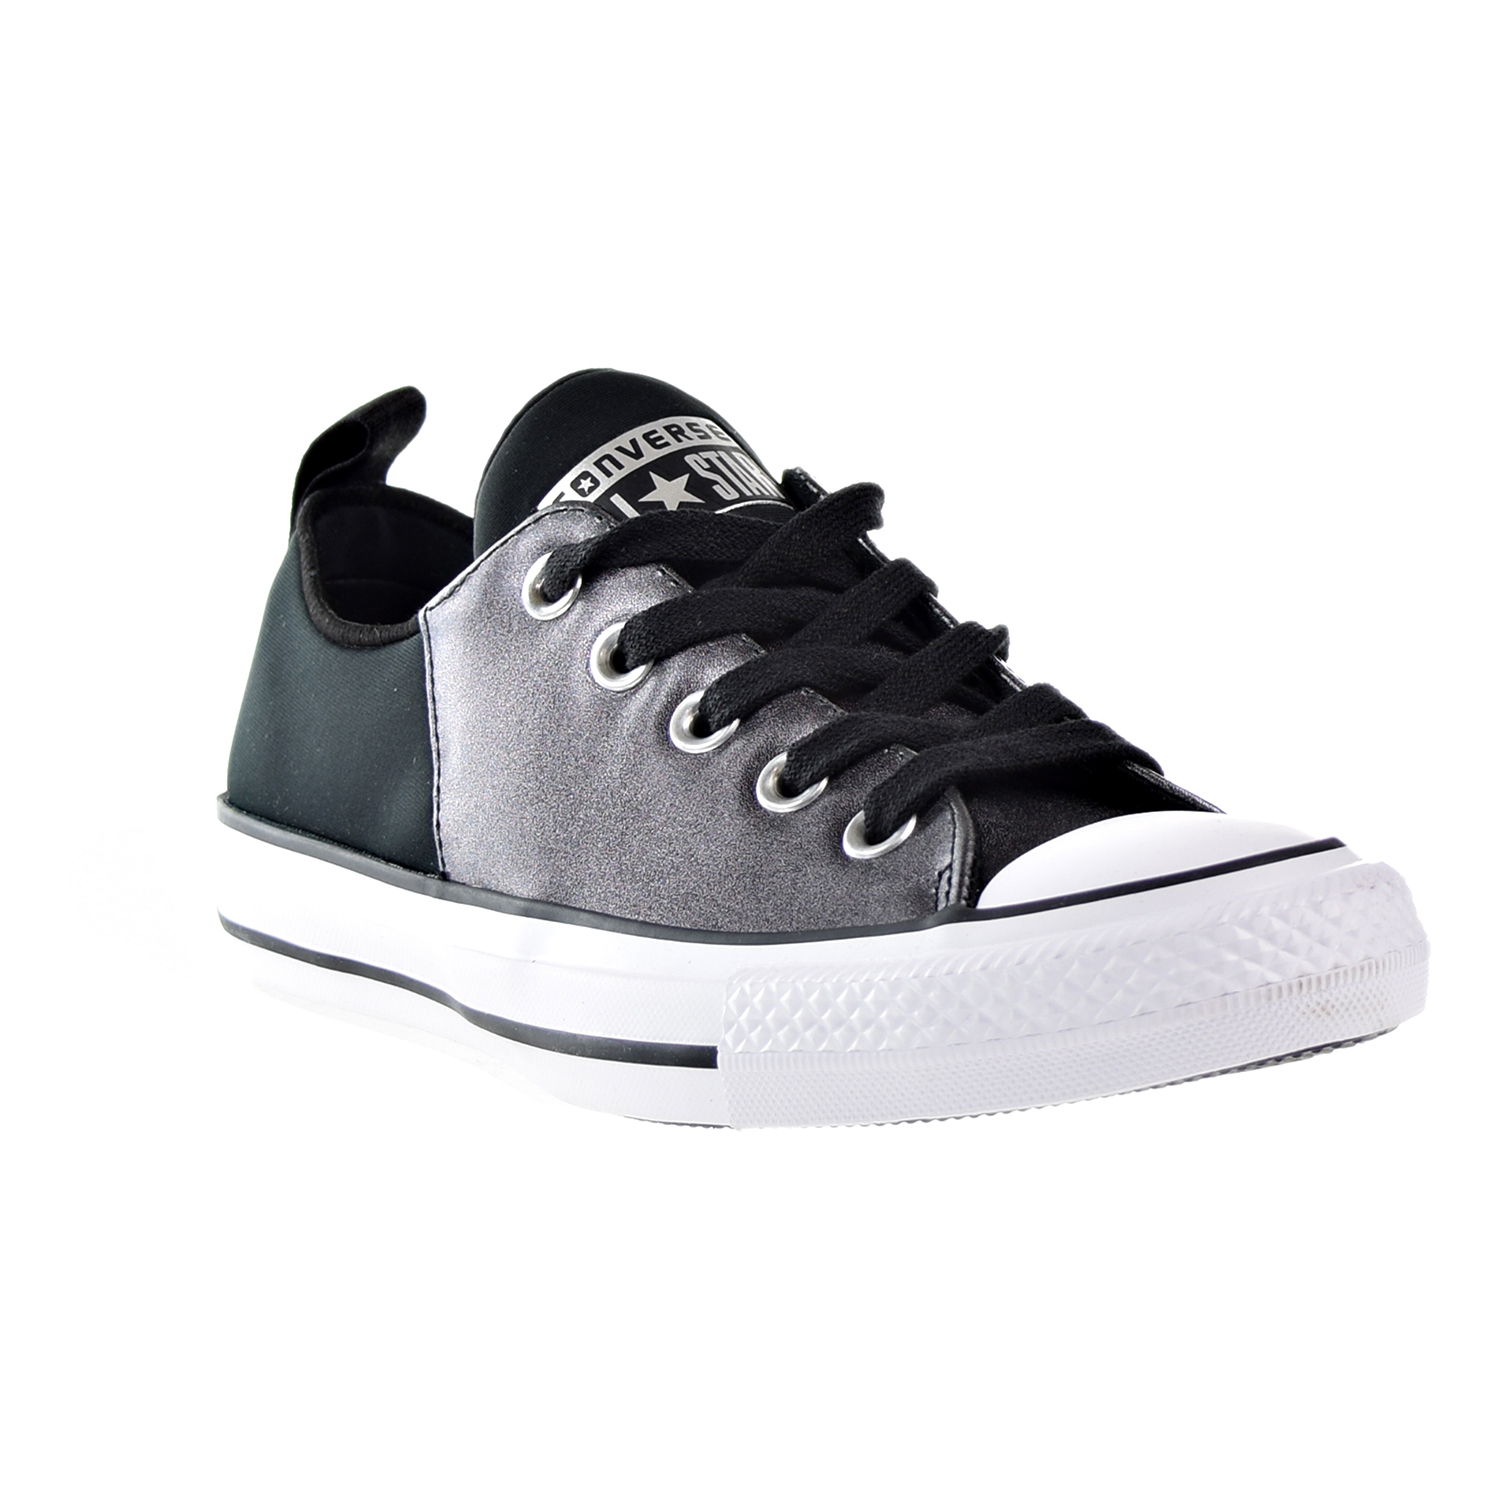 Converse Chuck Taylor All Star Sloane Glam Leather Low Top Women's Shoe Black/White555835c - image 2 of 6